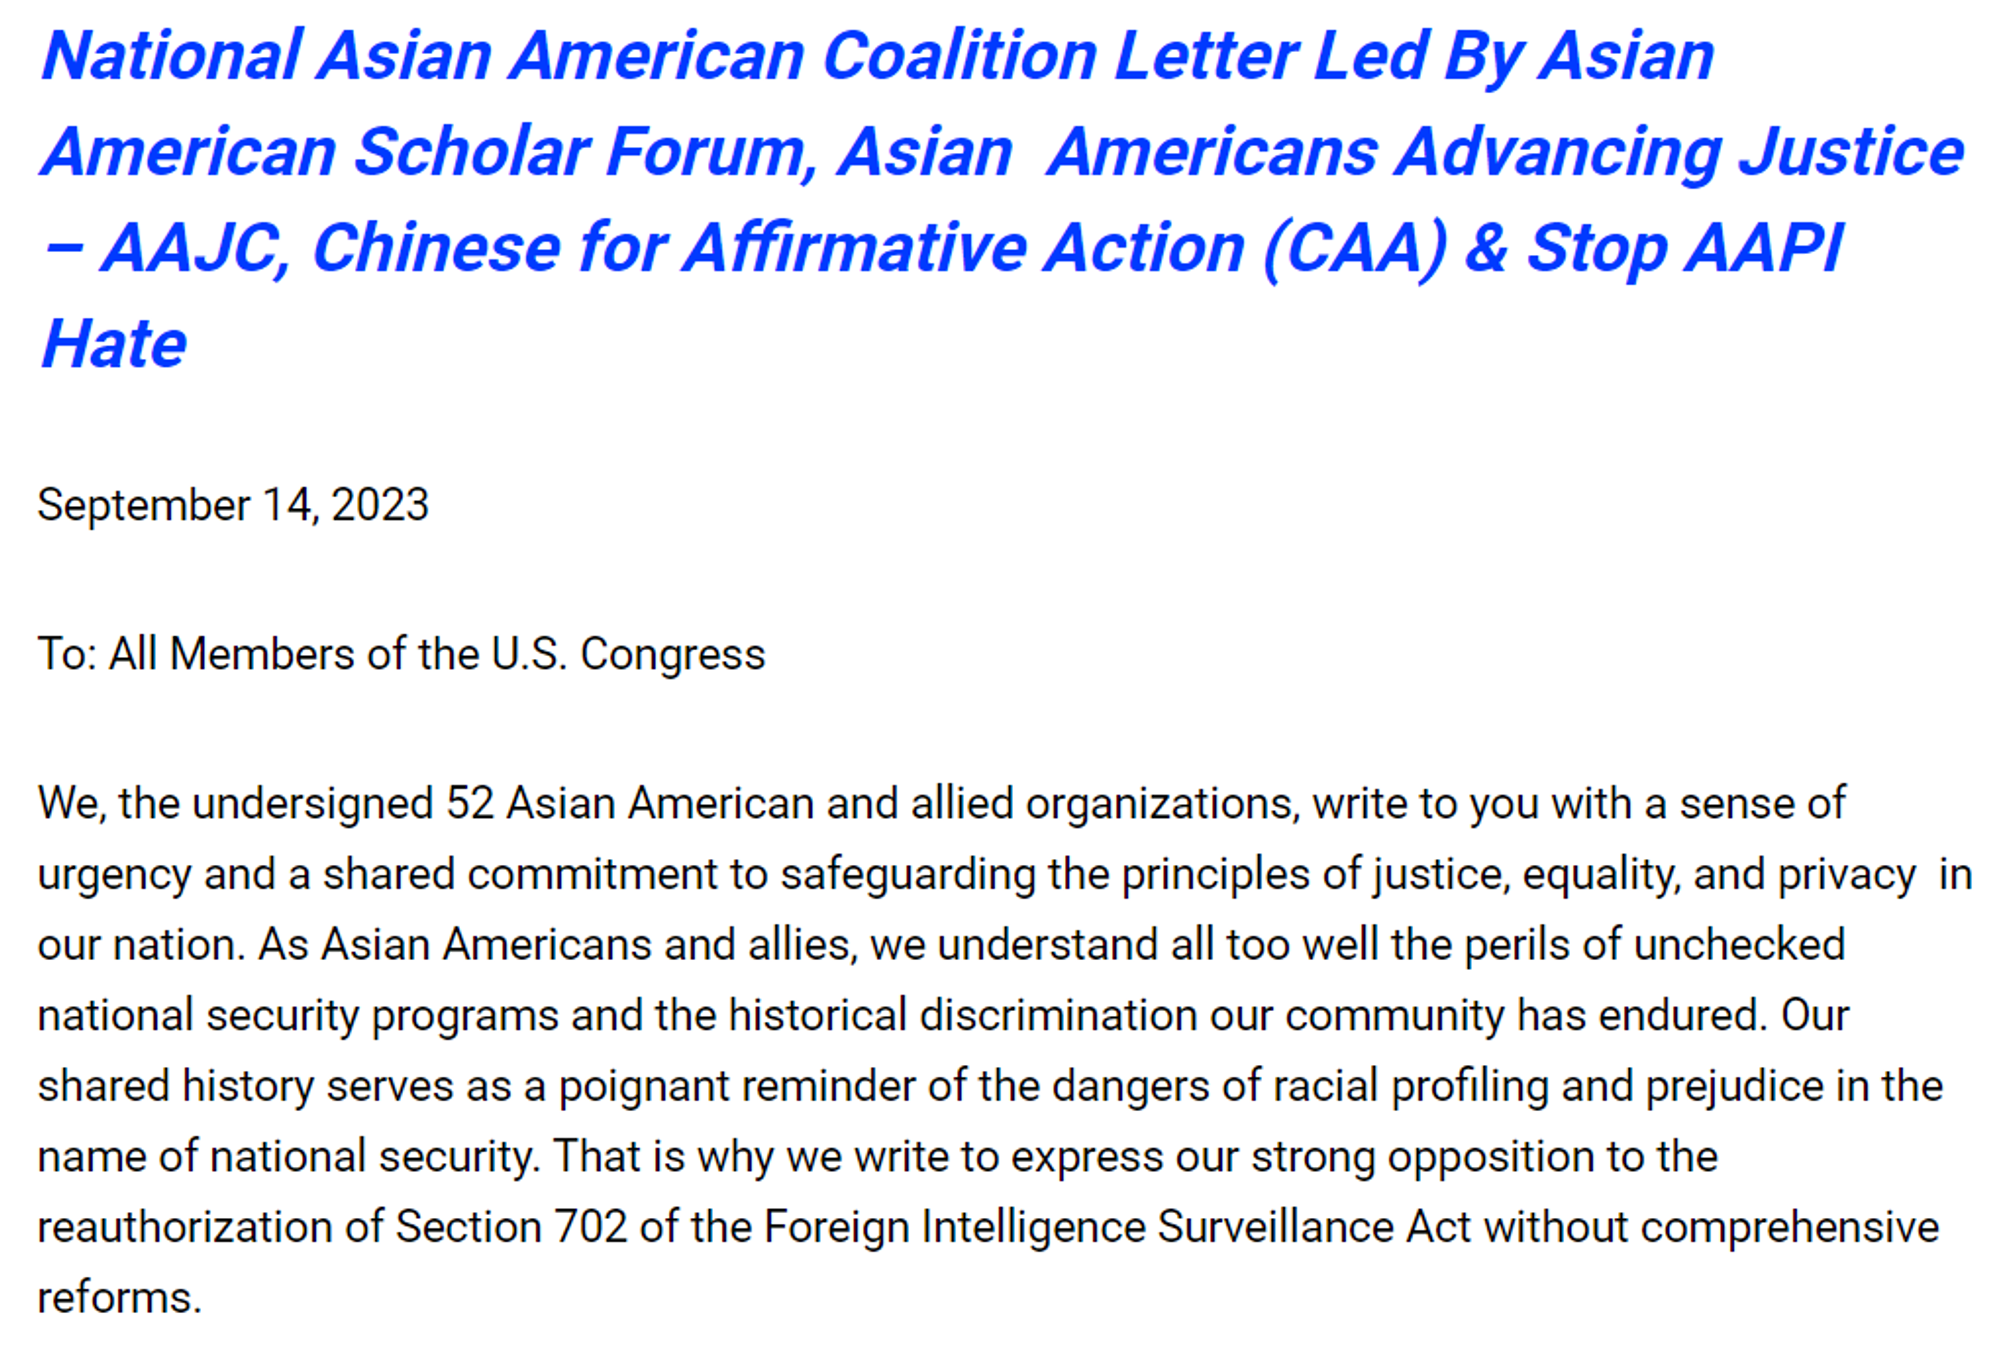 Image for 50+ Asian American and allied organizations call on Congress to reform section 702